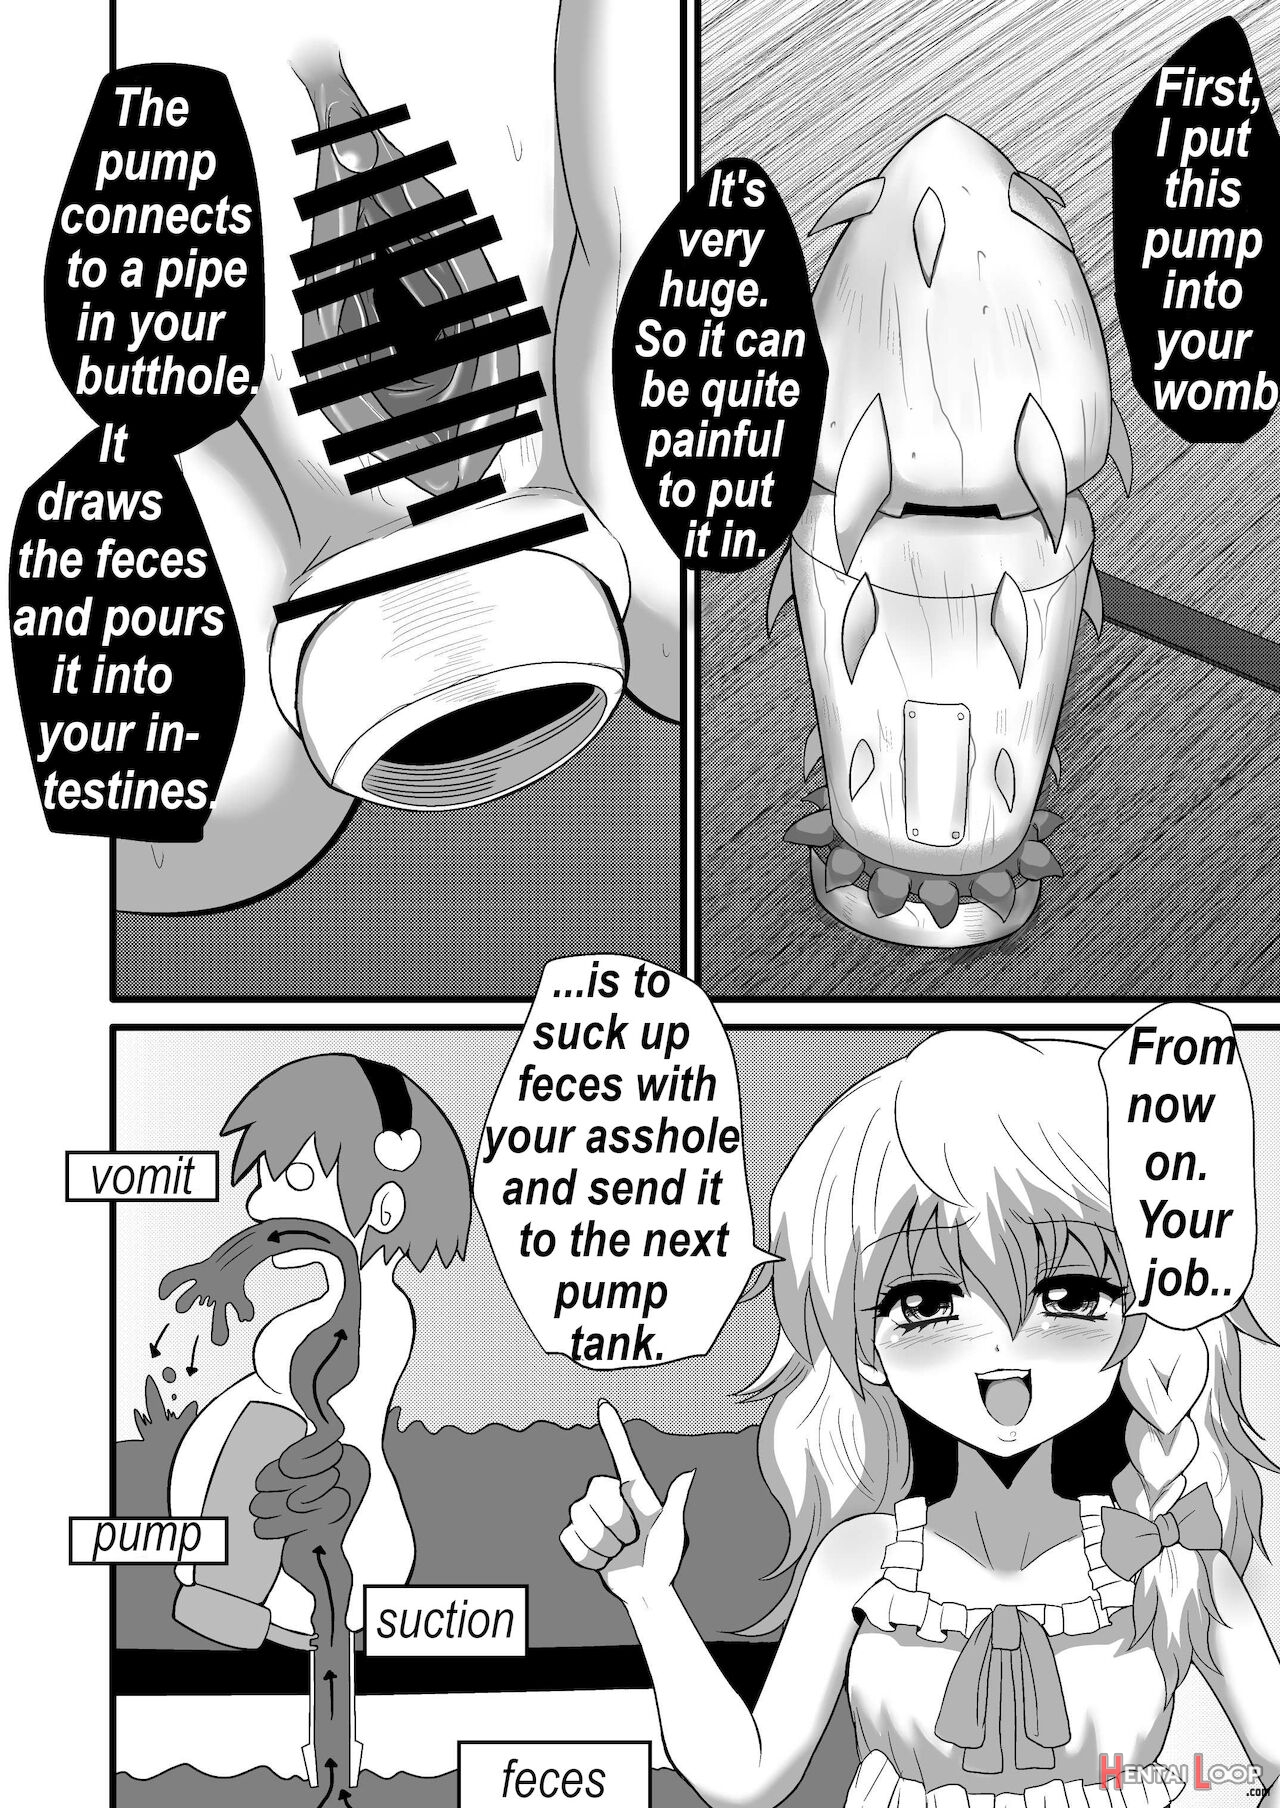 Marisa's Thrill - Take Care Of Yourself - 通り魔理沙にきをつけろ - Part 5 page 6